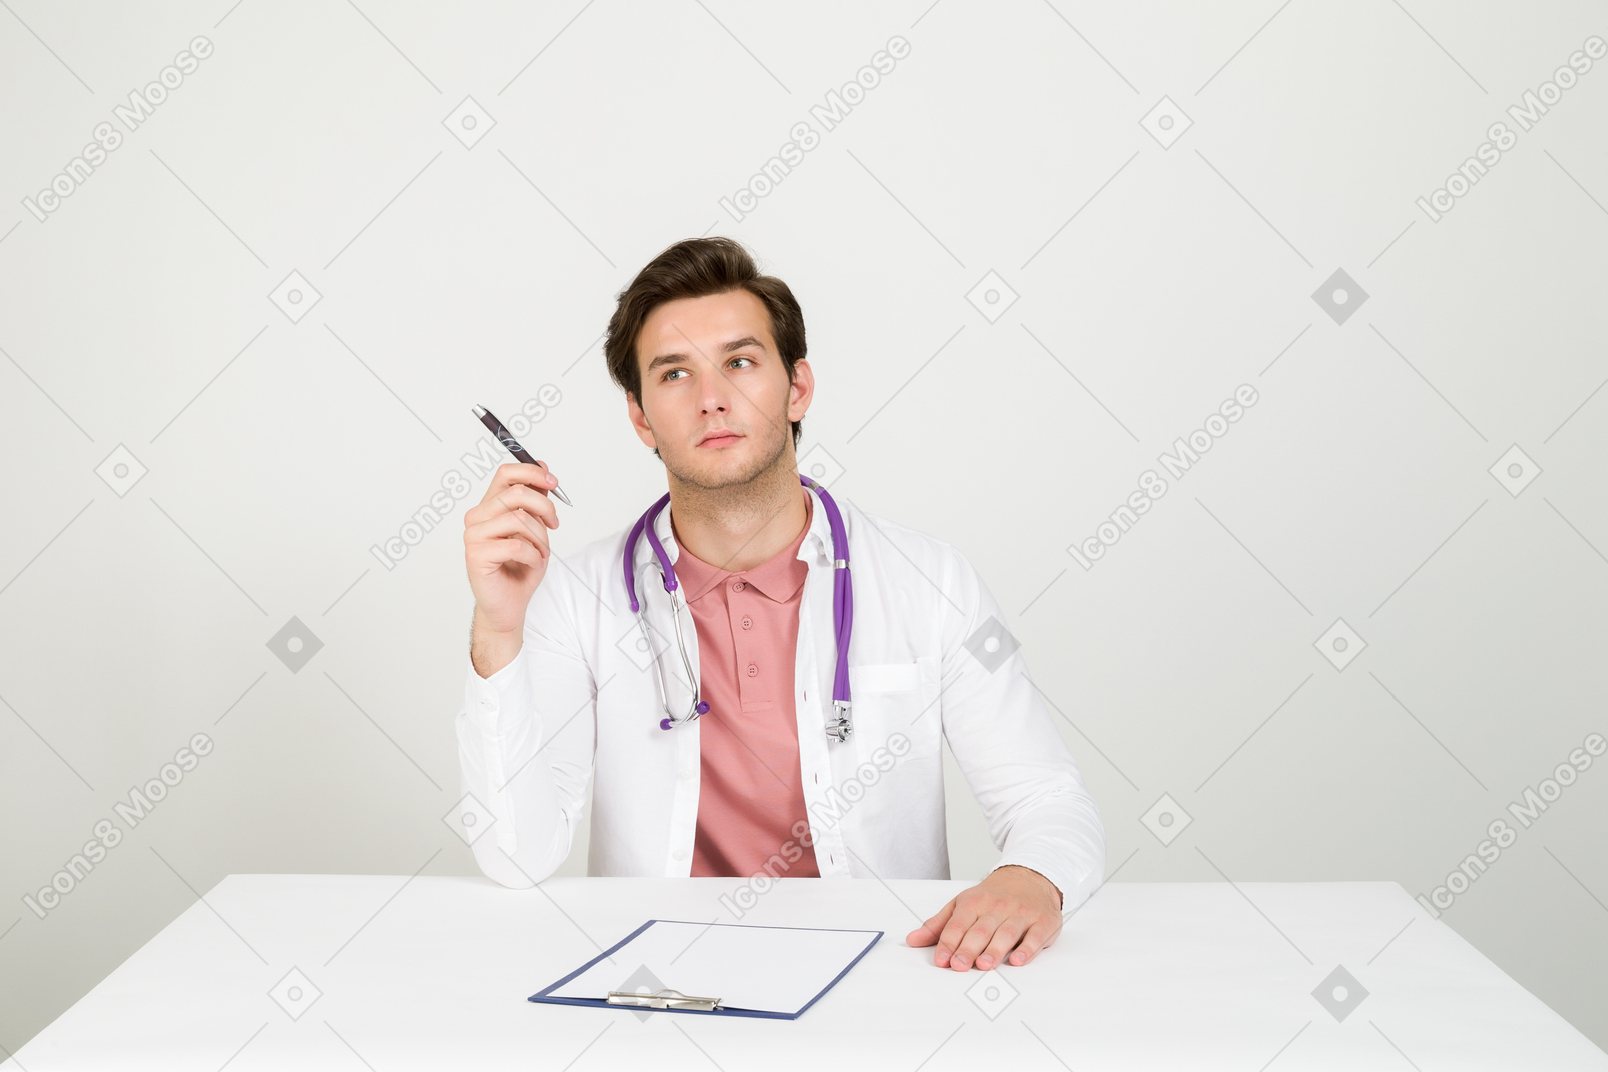 Doctor's work requires maximum attention